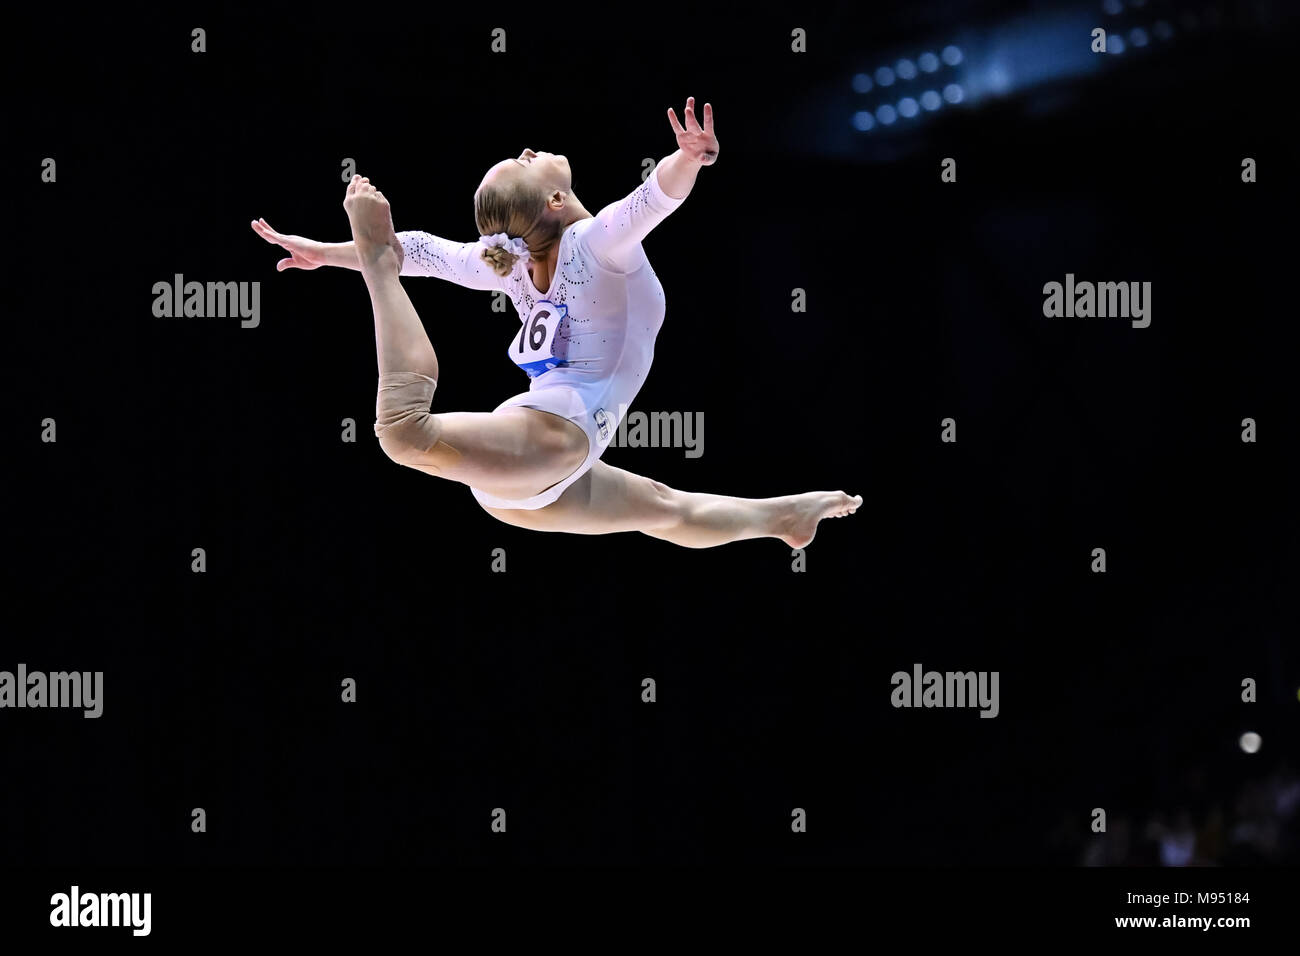 Birmingham, UK. 22nd march, 2018. Nikita Nagornyy (RUS) competes on the Balance Beam during the 2018 FIG Gymnastics World Cup at Arena Birmingham on Thursday, 22 March 2018. Birmingham England. Credit: Taka G Wu Credit: Taka Wu/Alamy Live News Stock Photo